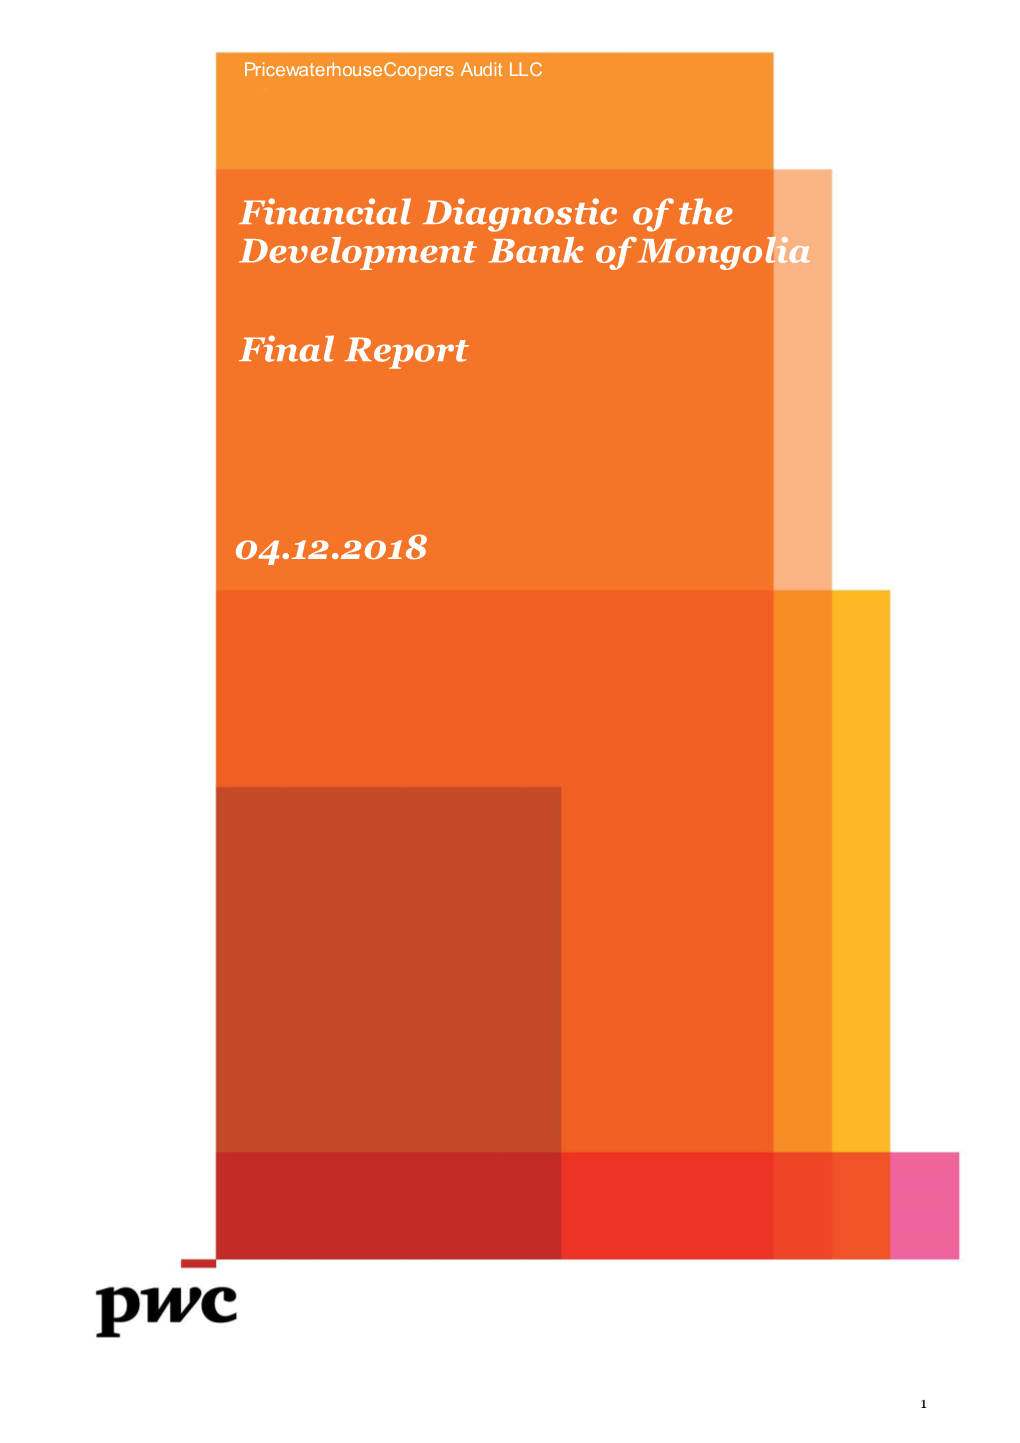 Financial Diagnostic of the Development Bank of Mongolia